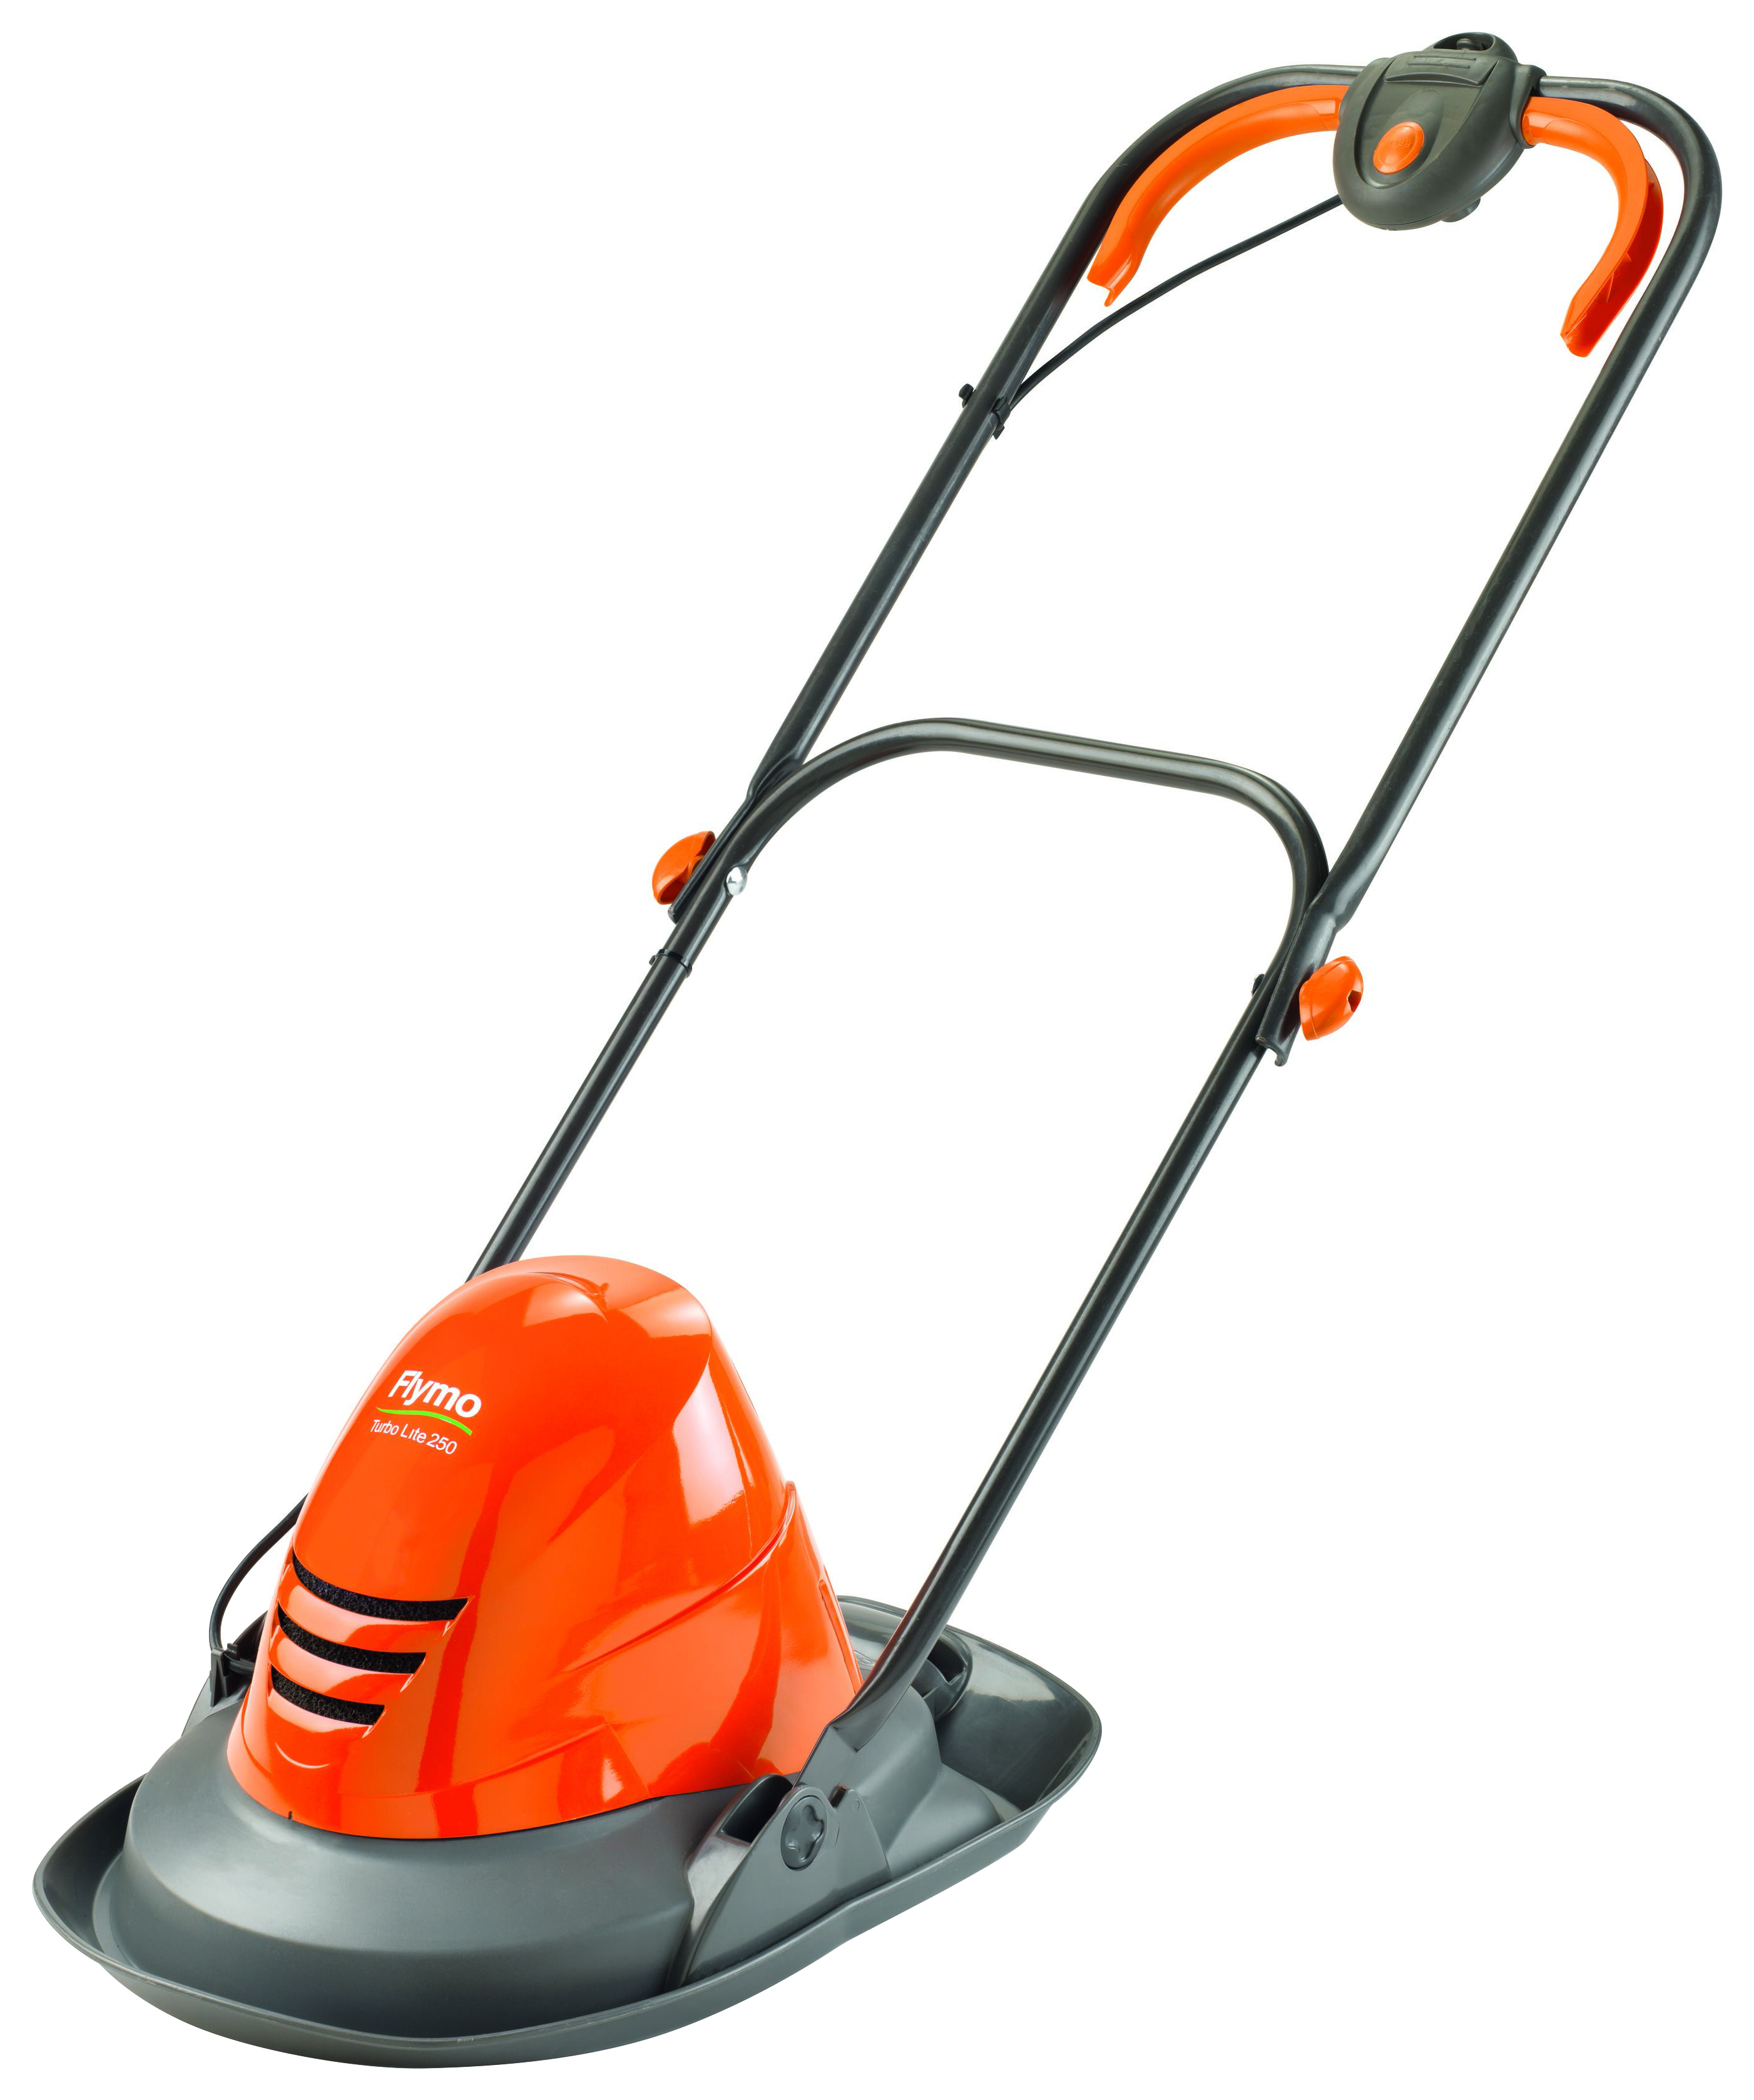 Image of Flymo Turbo Lite 250 Corded Hover Lawnmower - 1400W